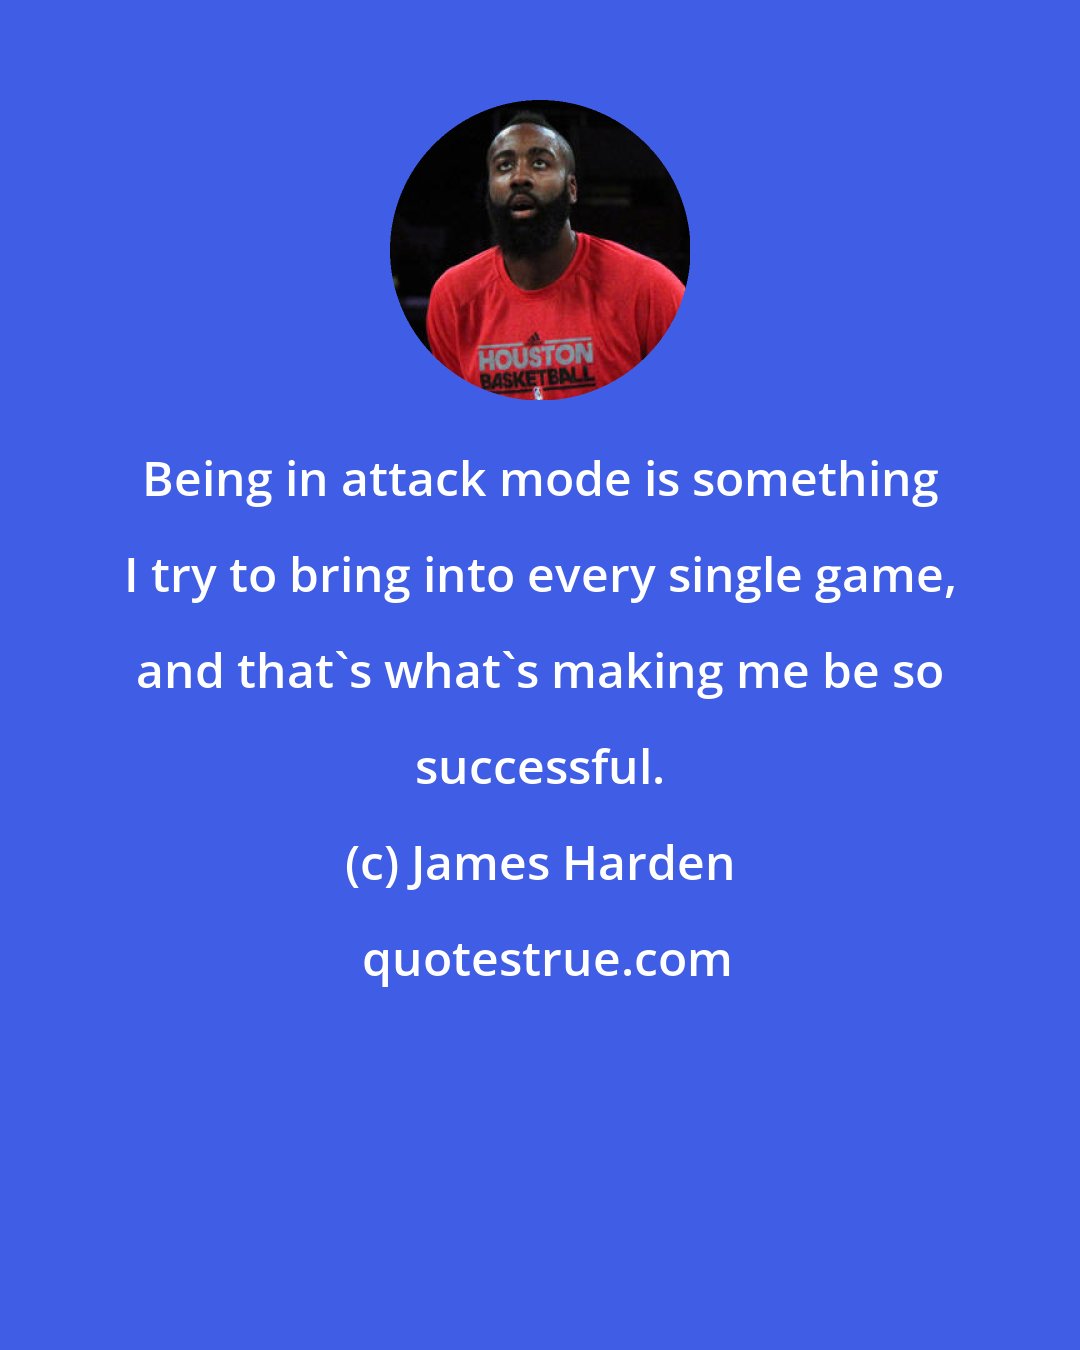 James Harden: Being in attack mode is something I try to bring into every single game, and that's what's making me be so successful.